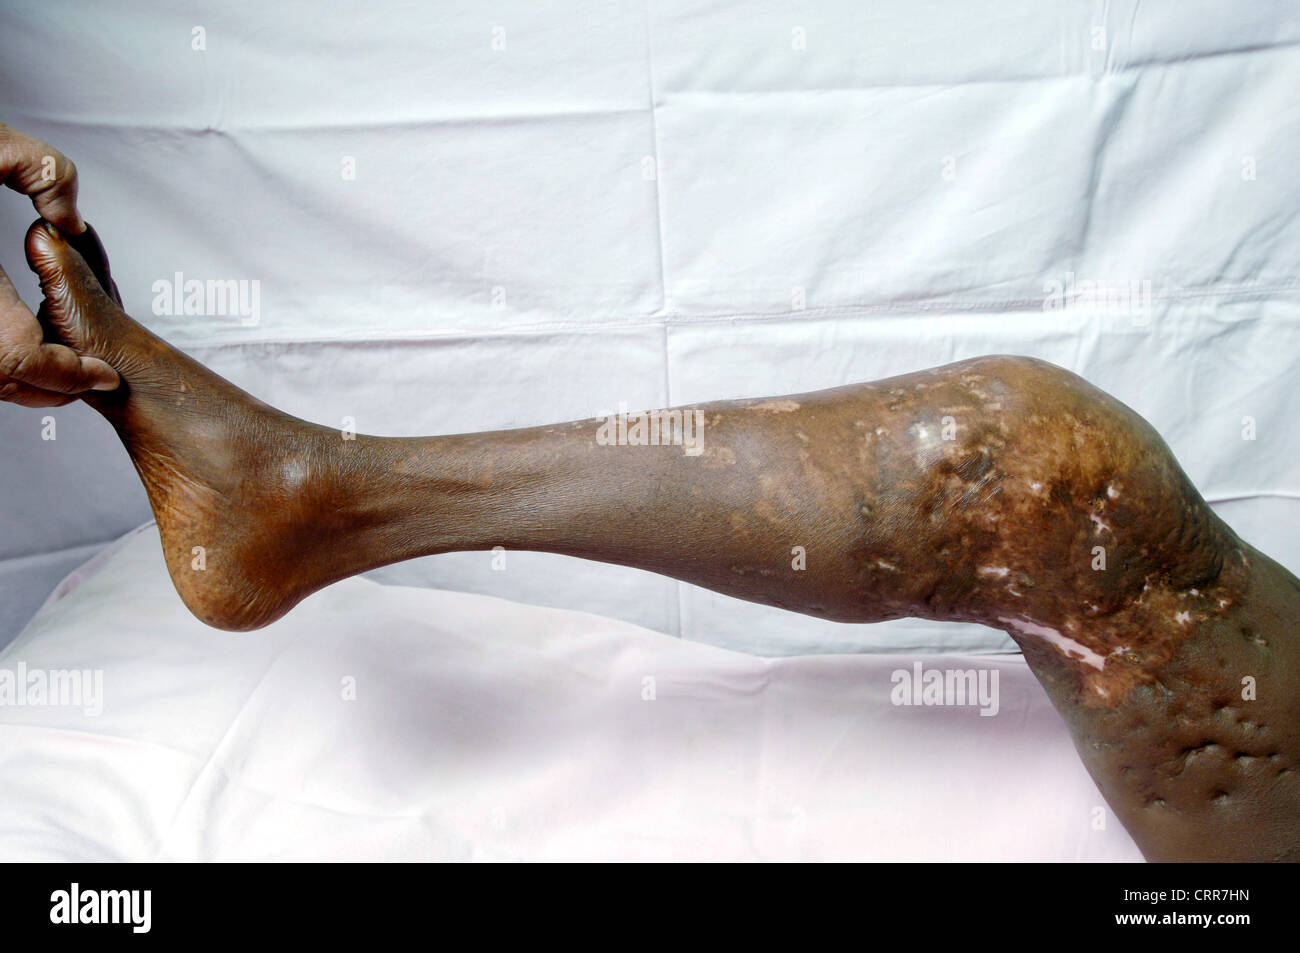 A patient with Chronic Granulomatous on the leg Stock Photo